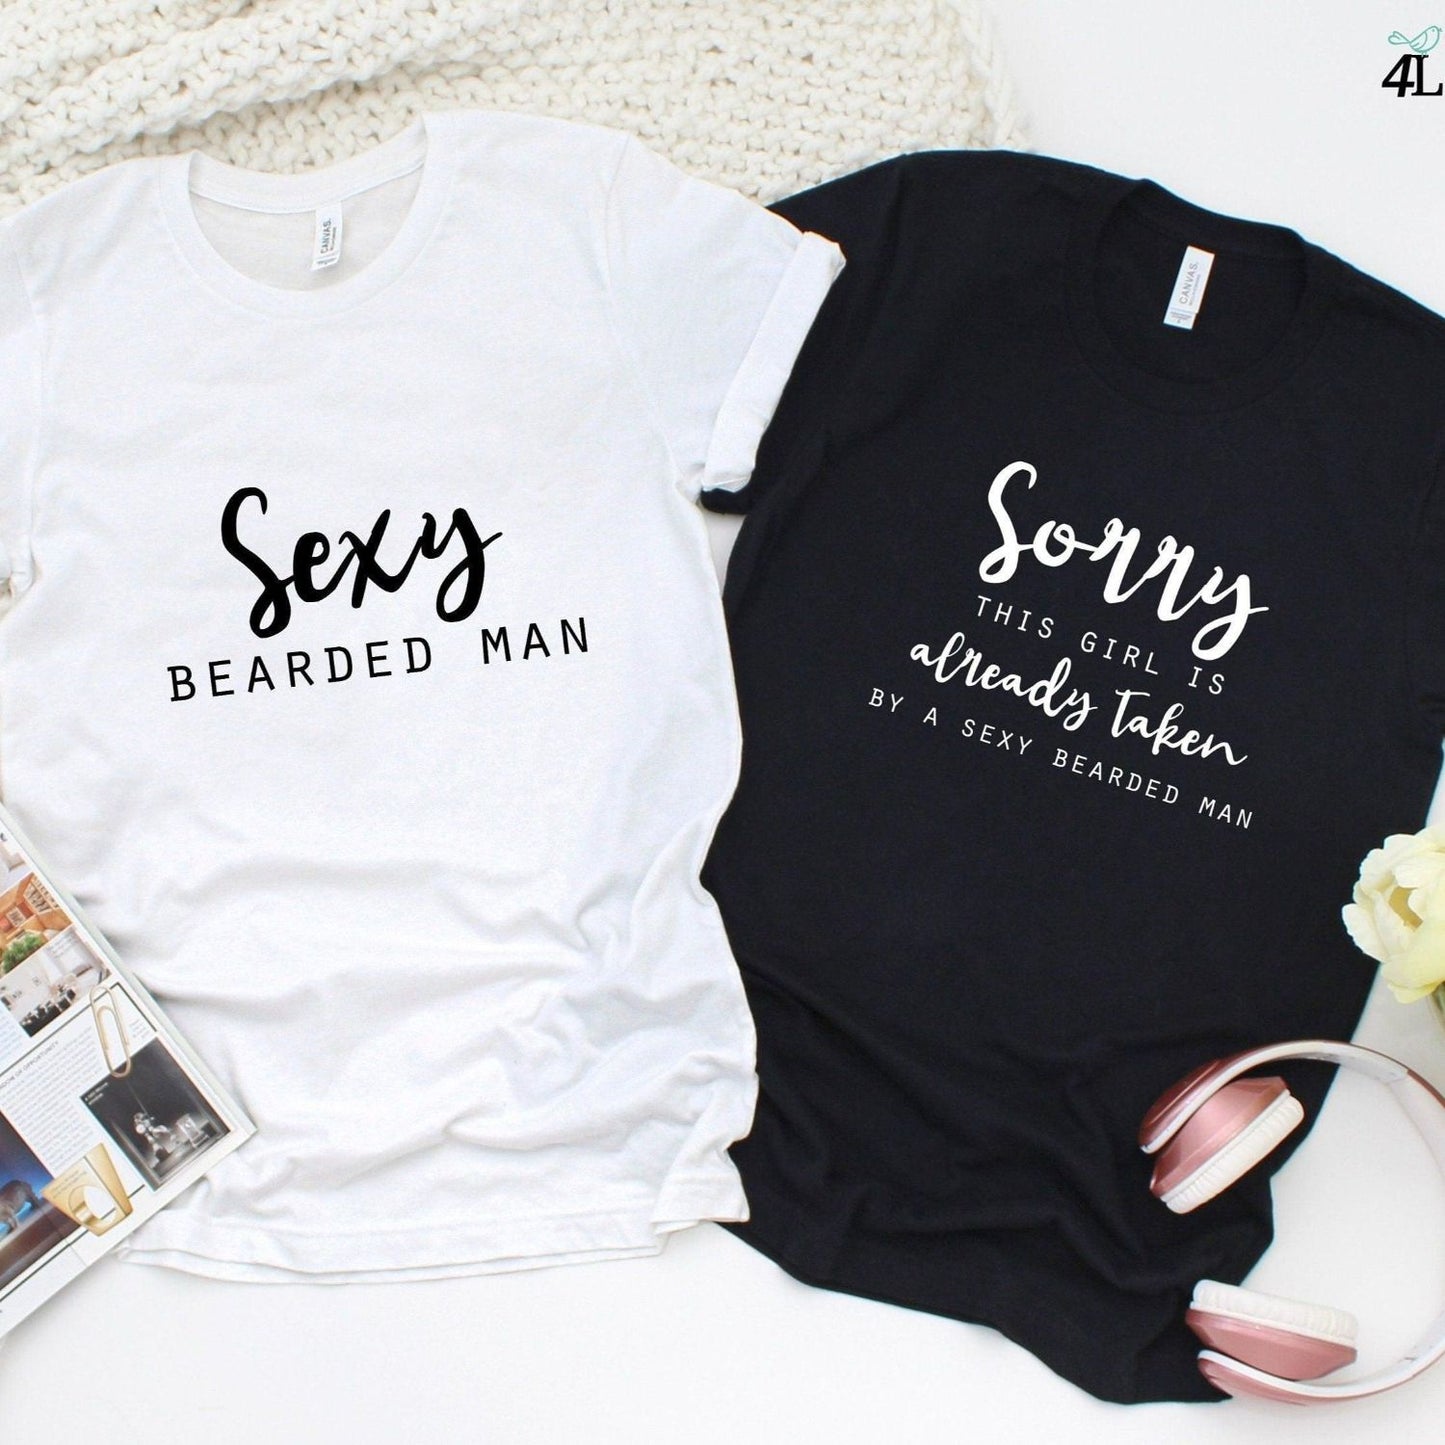 Bearded Man & Taken Girl Humorous Matching Outfits - Ideal Couple Gift Set for Valentine's Day